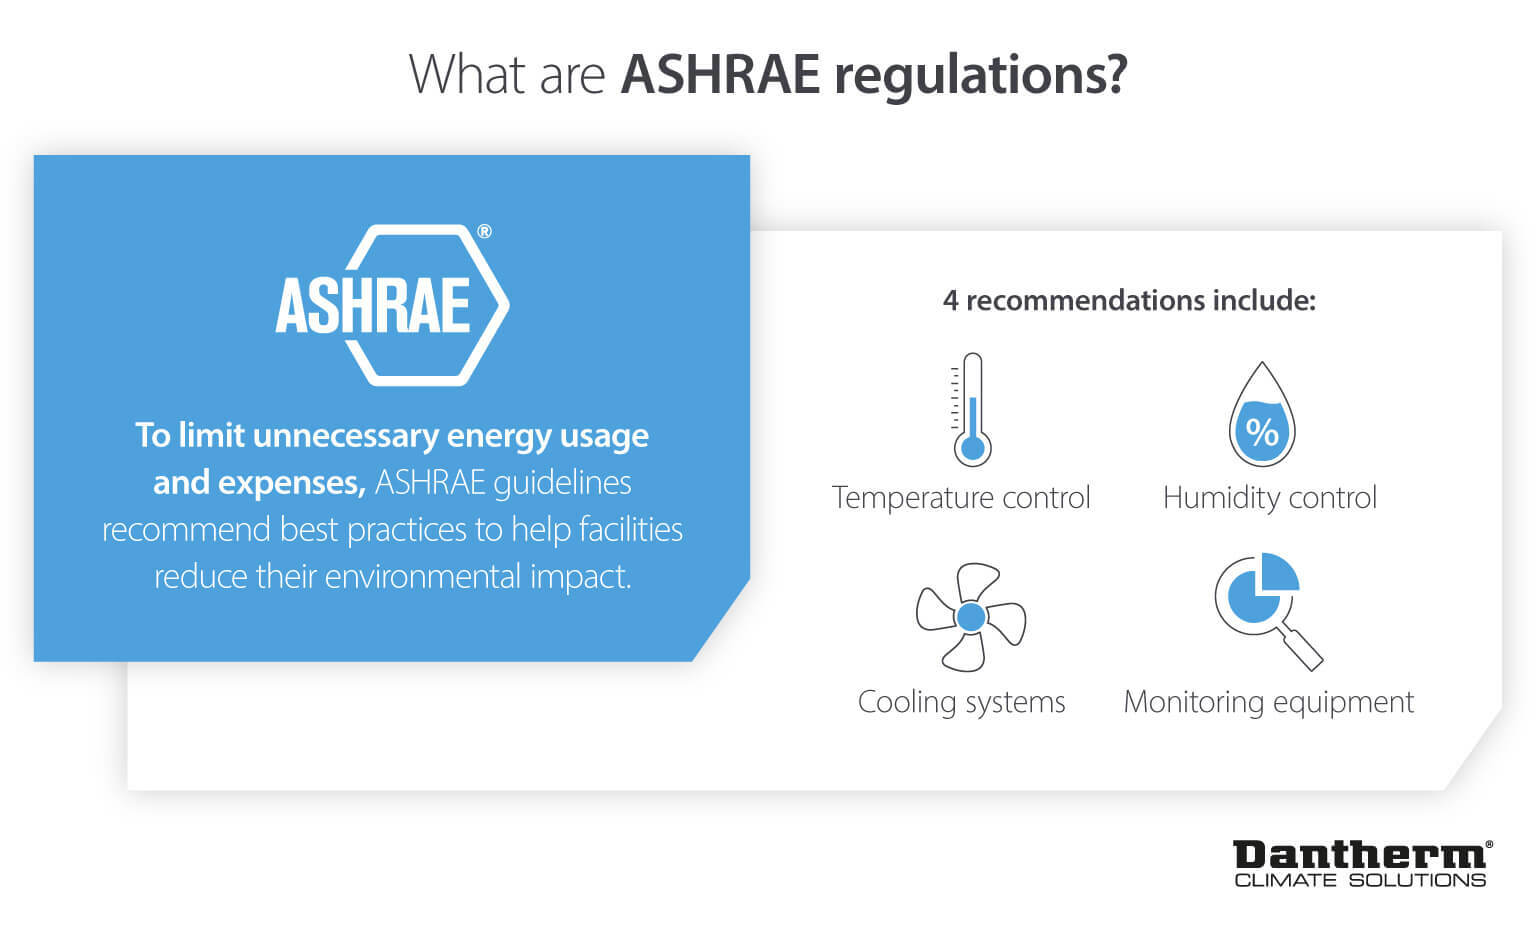 Data centres and ASHRAE regulations to limit energy usage - Infographic